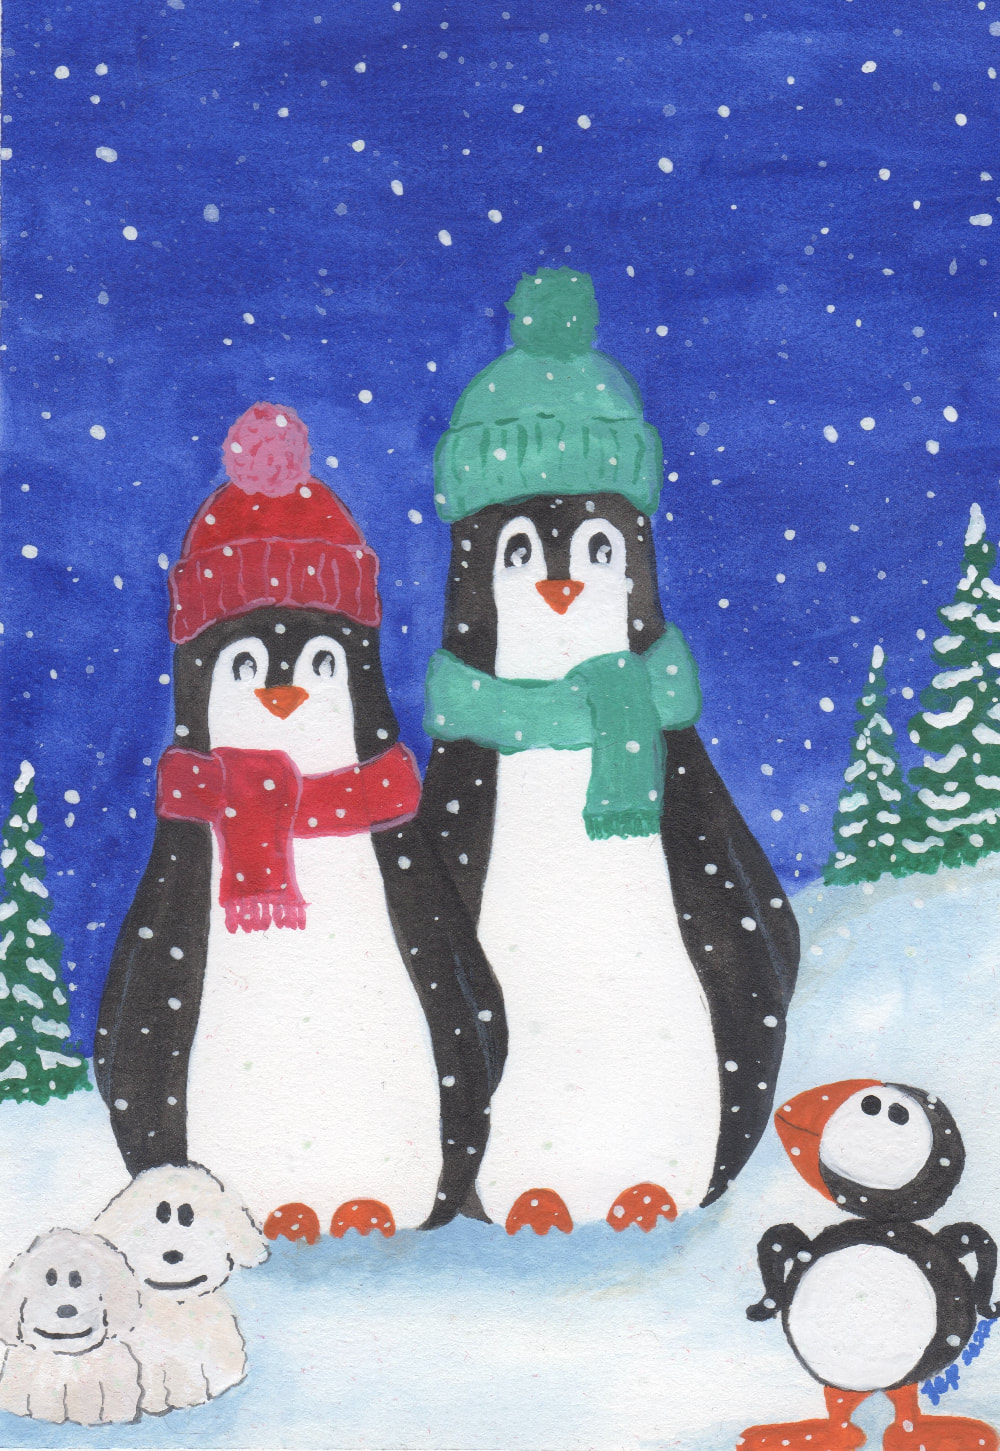 Gouache painting of two penguins standing in the snow. They’re each wearing a hat and scarf, one in red, the other in teal. There are two little white dogs sitting together in the front left corner, and a cute penguin from Elf in the bottom right corner. There are a few snow-covered pine trees in the background and snowflakes falling softly. 